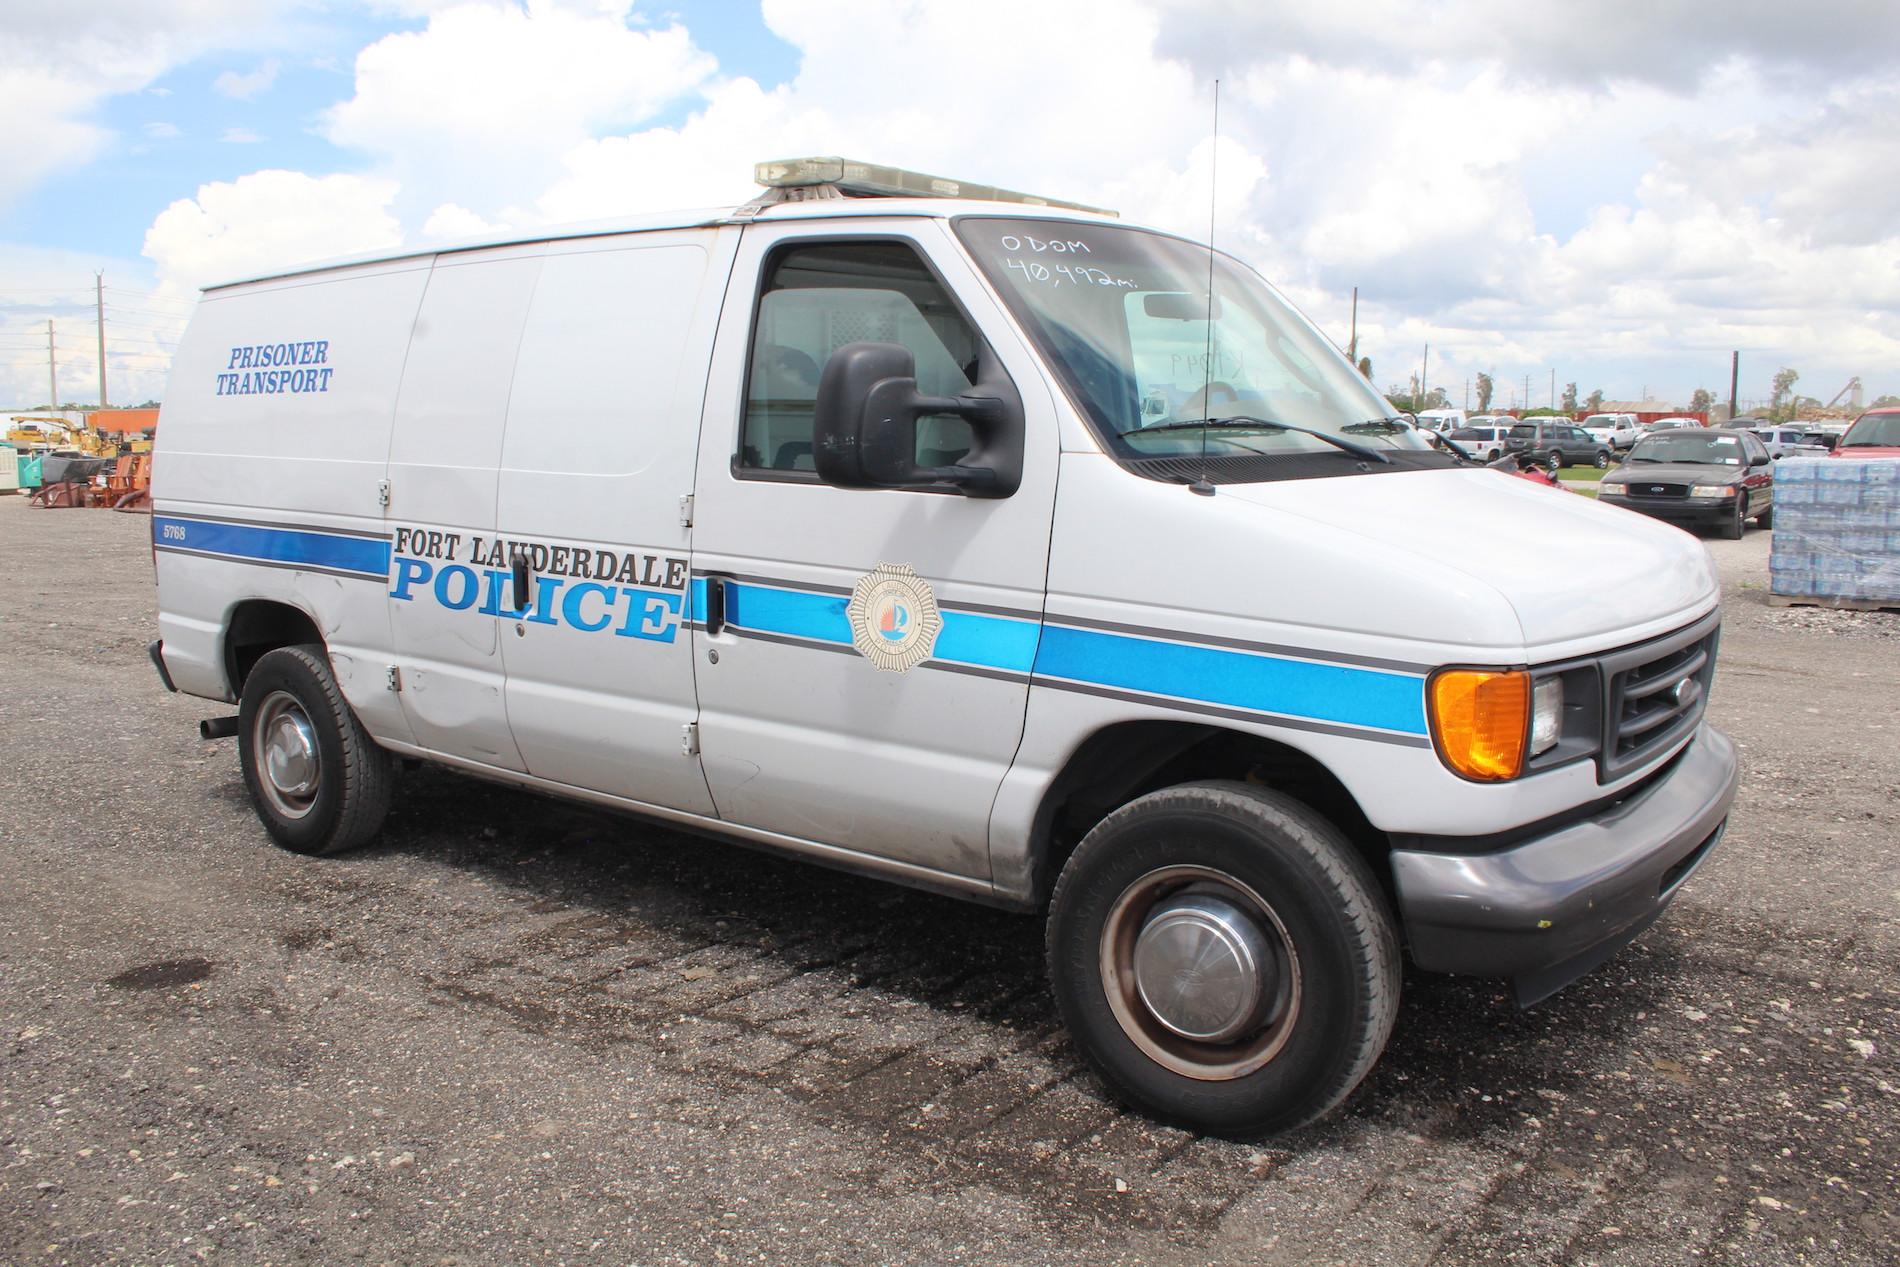 2006 Ford E-250 Detainee Transport Vehicle